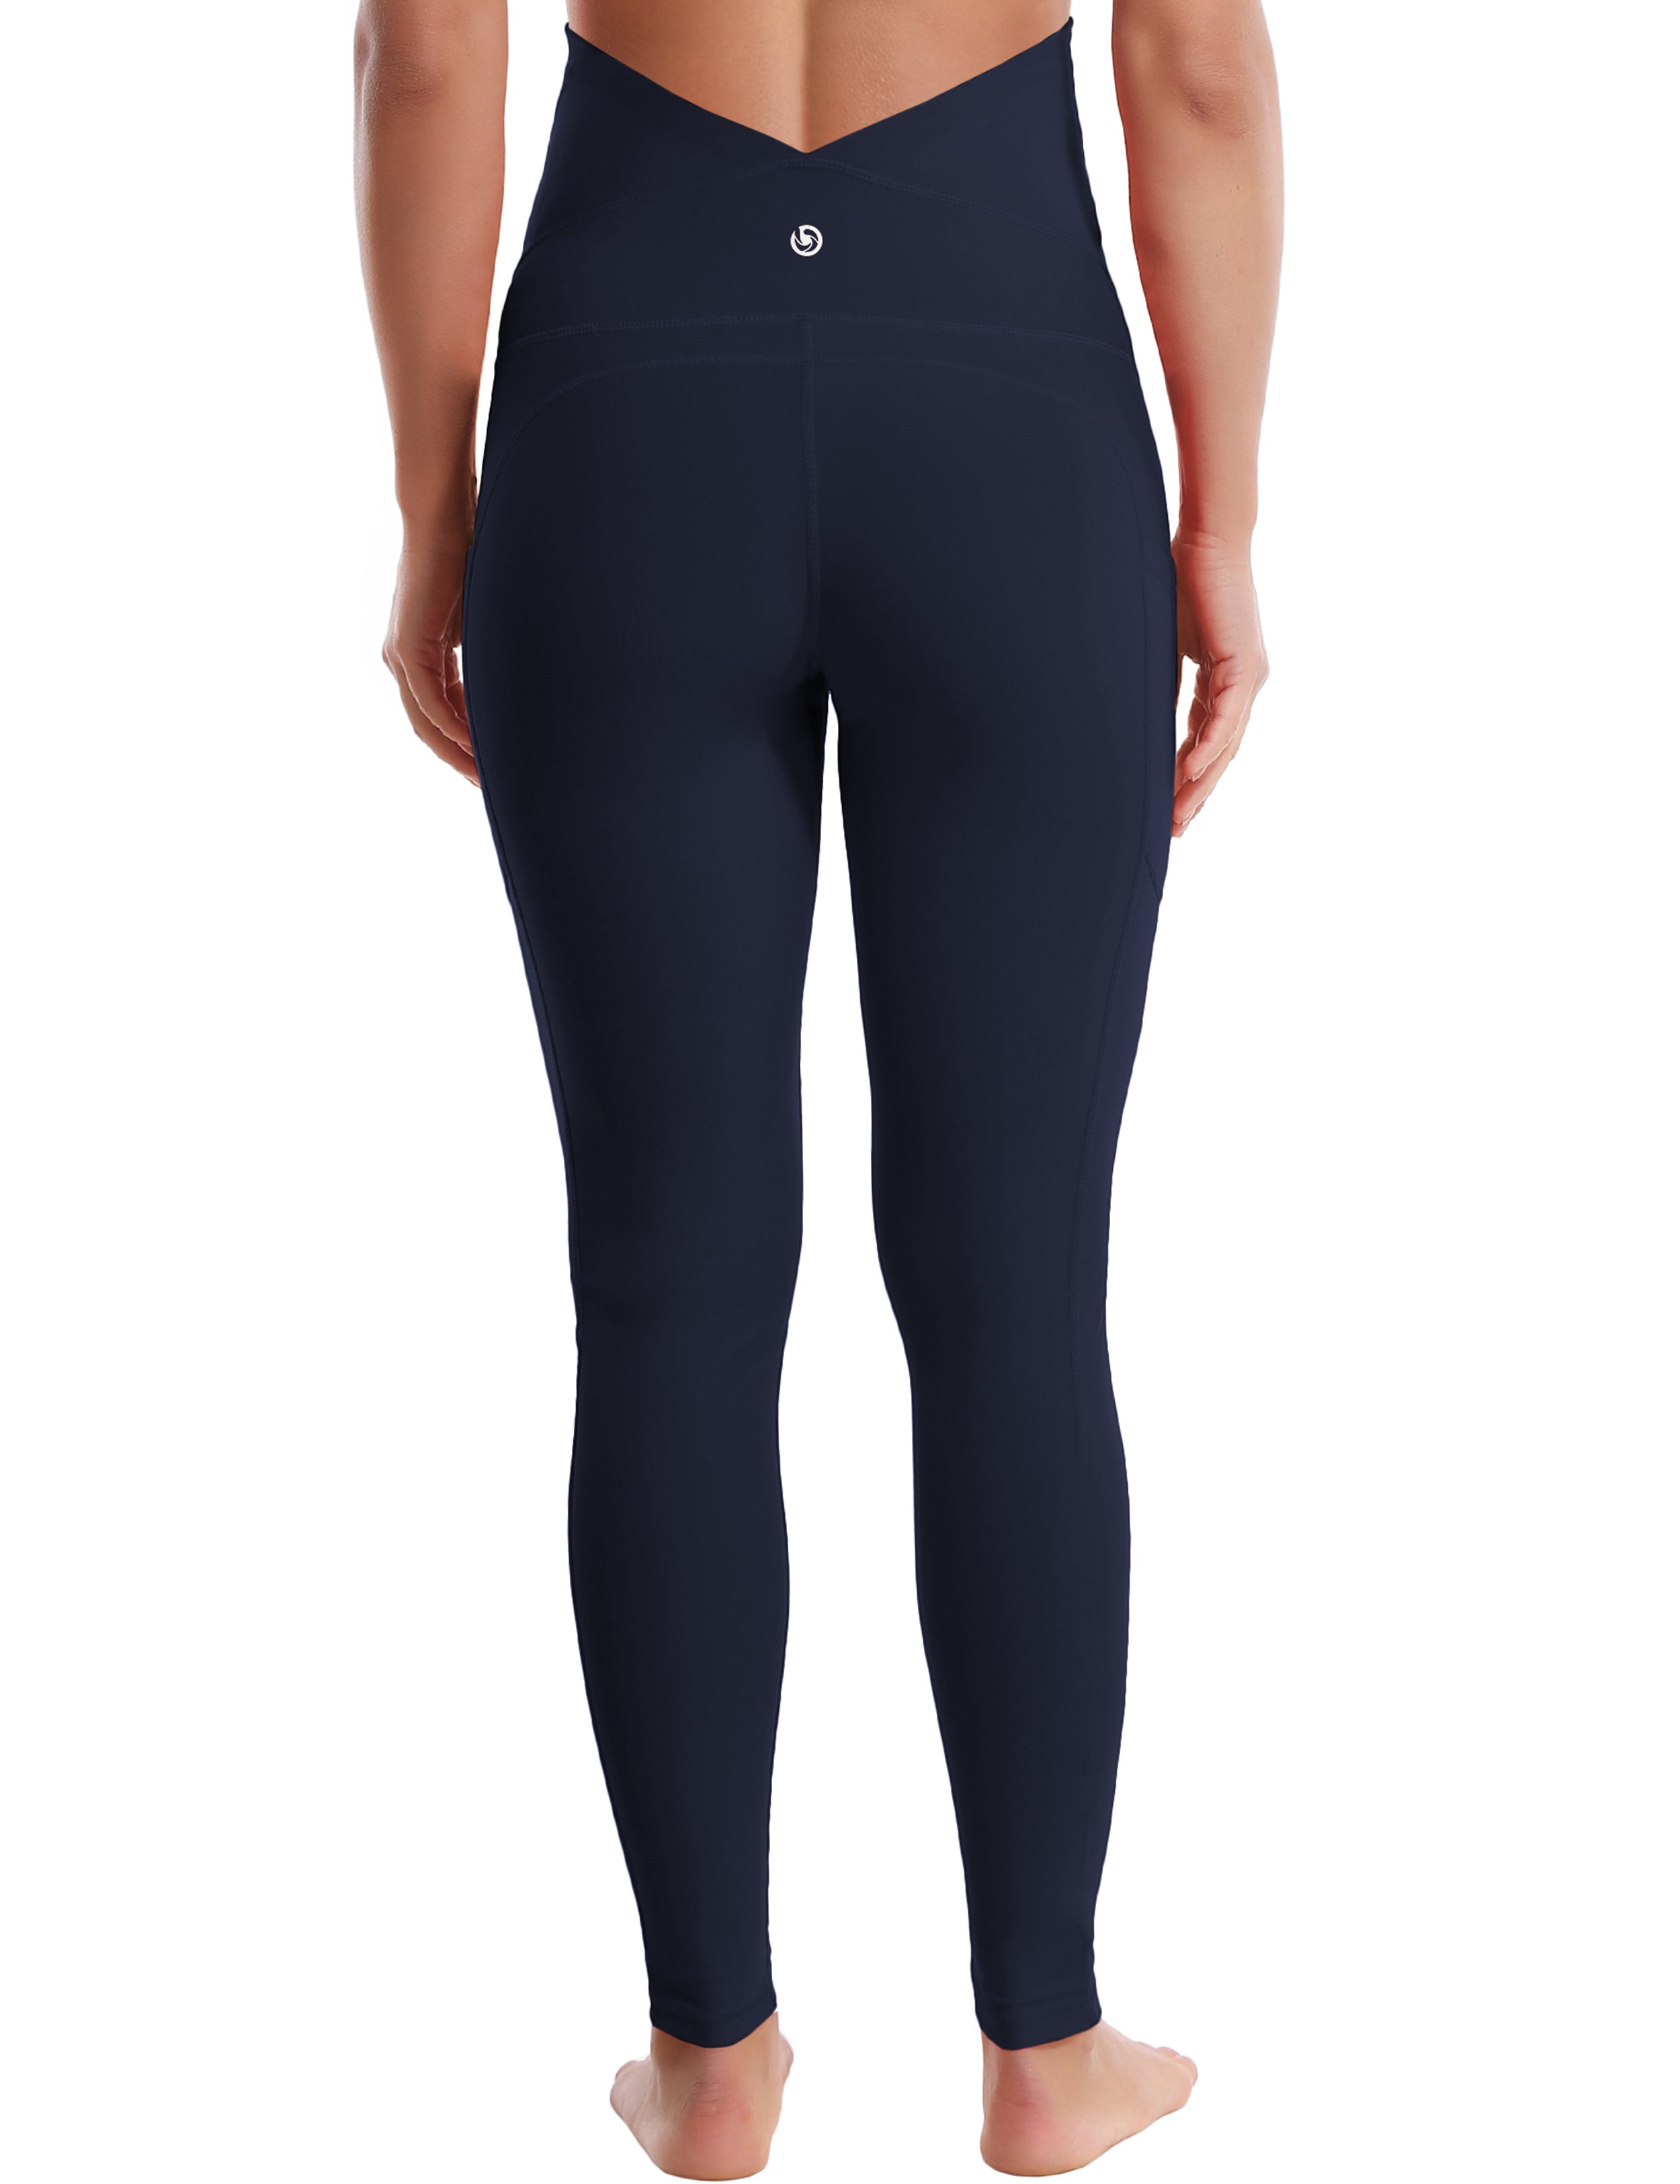 26" Side Pockets Maternity Yoga Pants darknavy 87%Nylon/13%Spandex Softest-ever fabric High elasticity 4-way stretch Fabric doesn't attract lint easily No see-through Moisture-wicking Machine wash